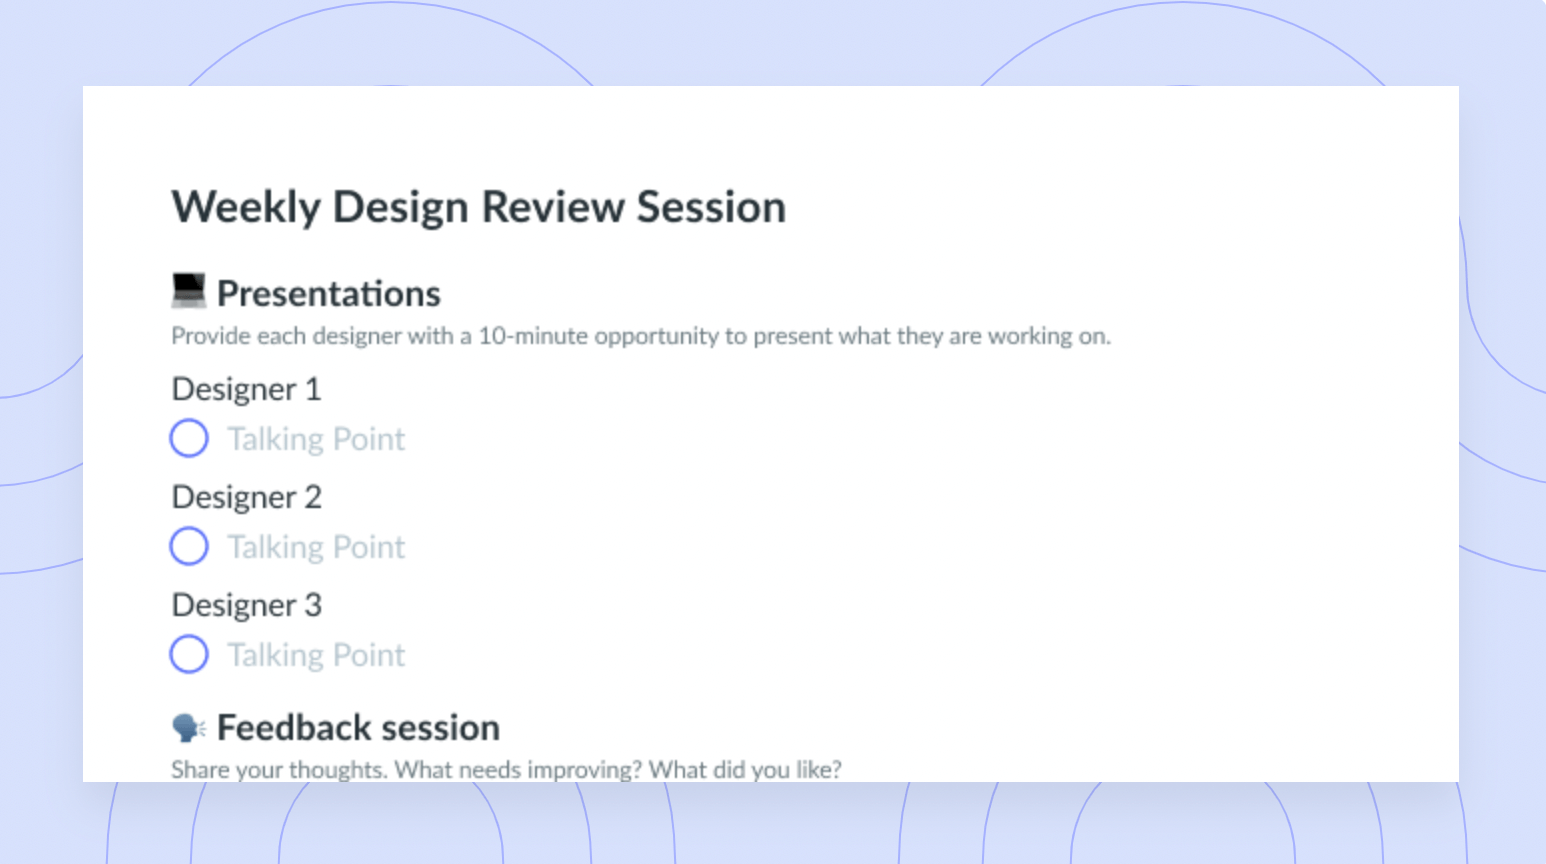 Weekly Design Review Session Agenda